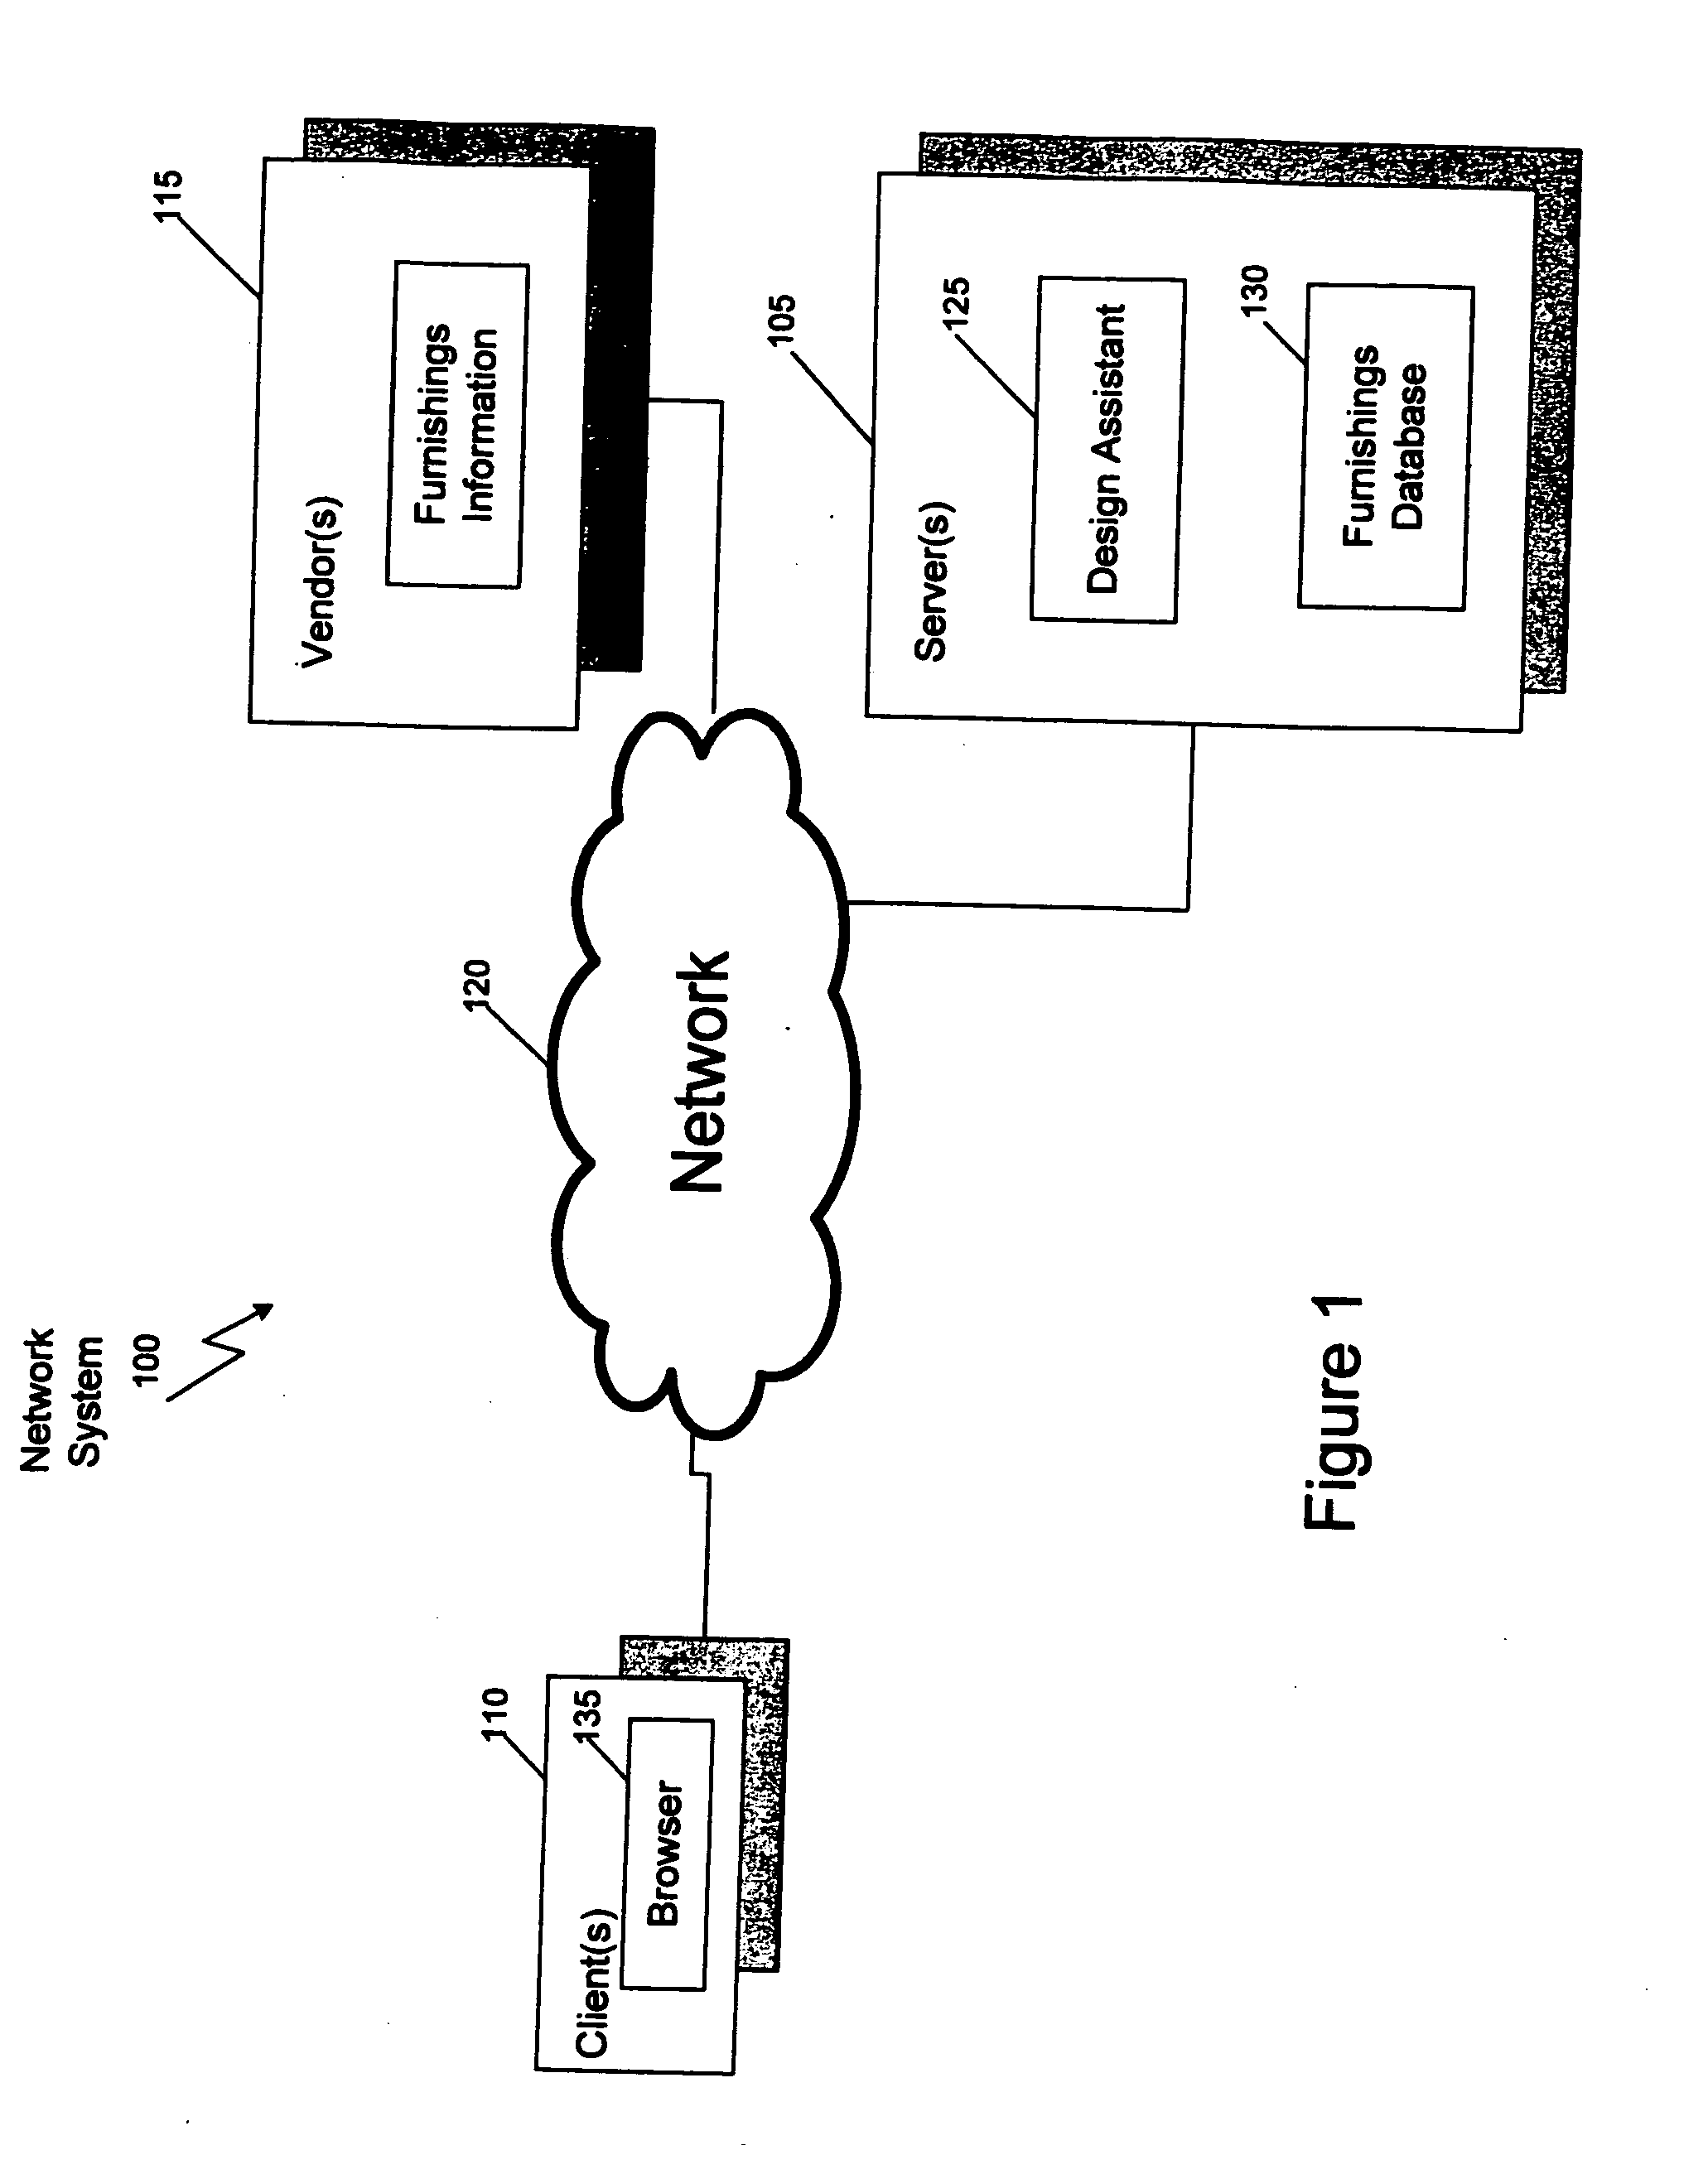 System and method for automatically assisting a consumer with space design and furnishings selection